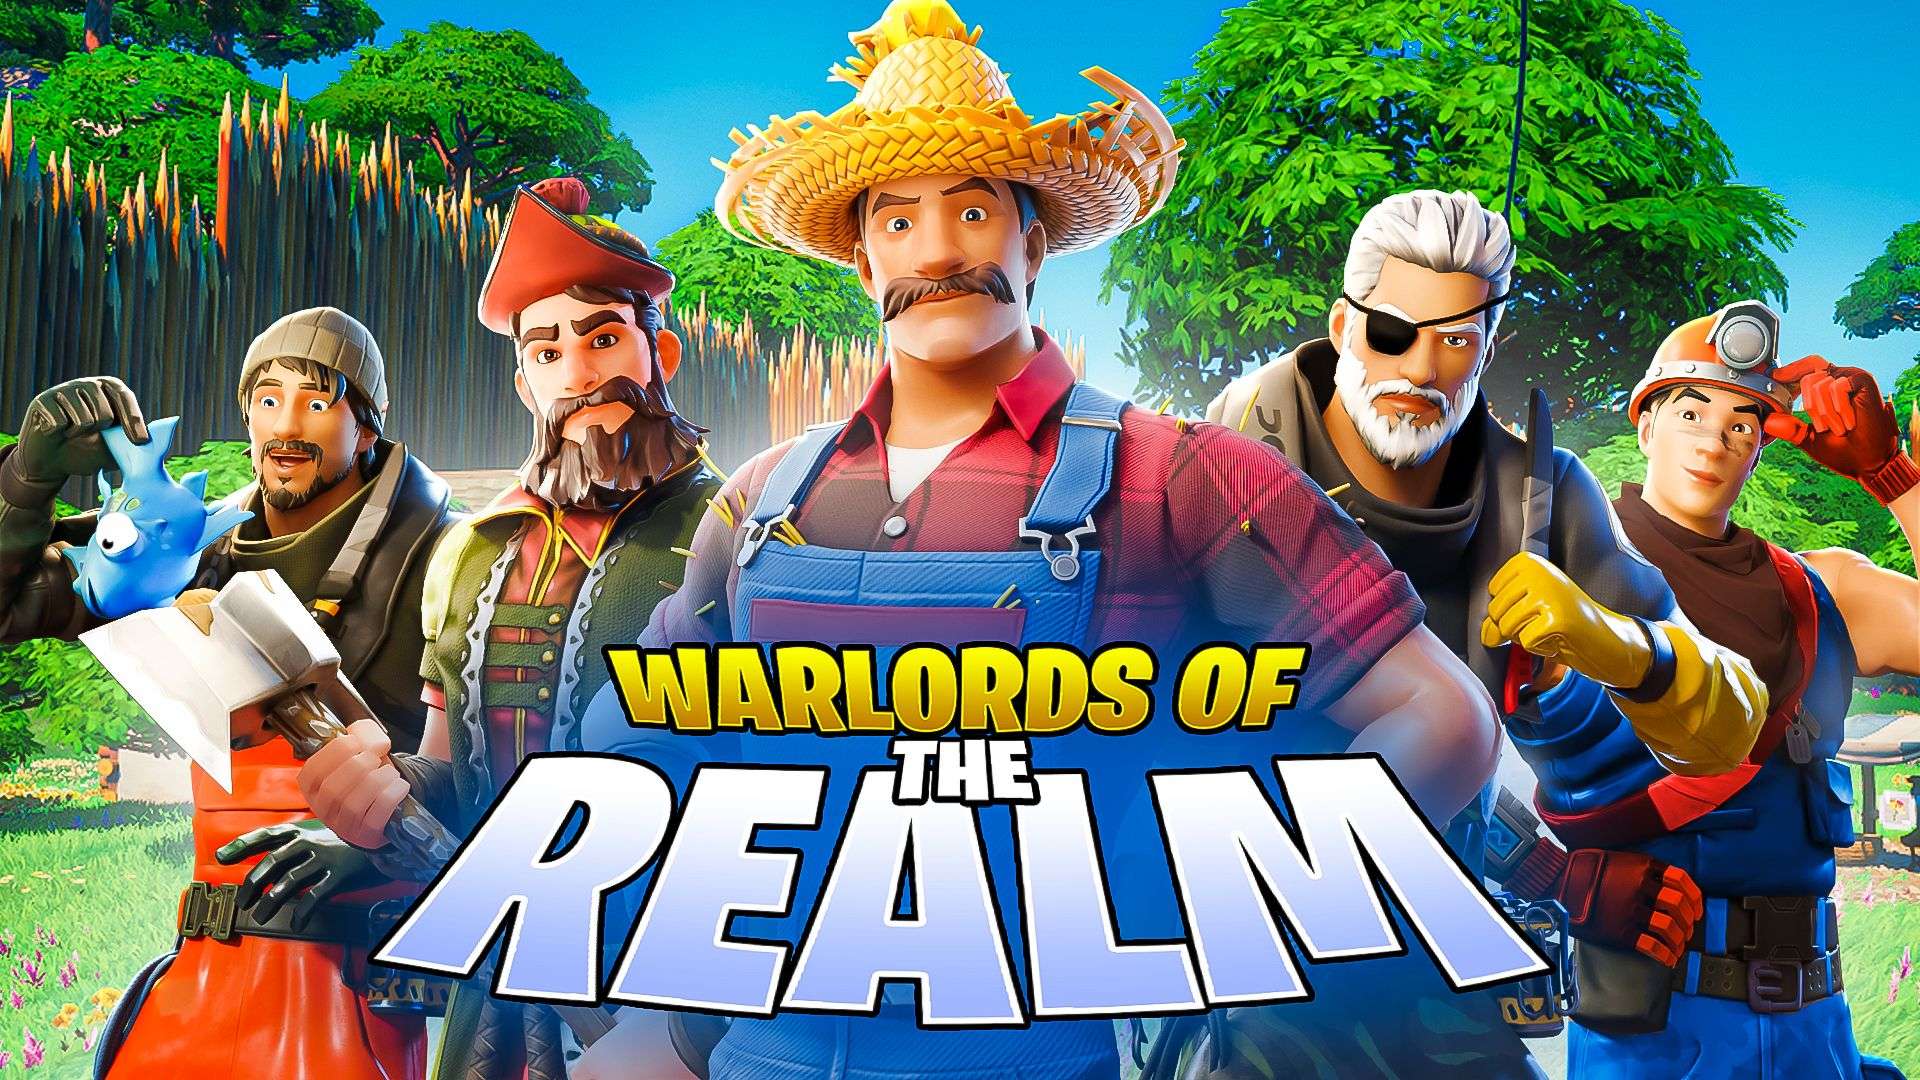 Warlords of the Realm